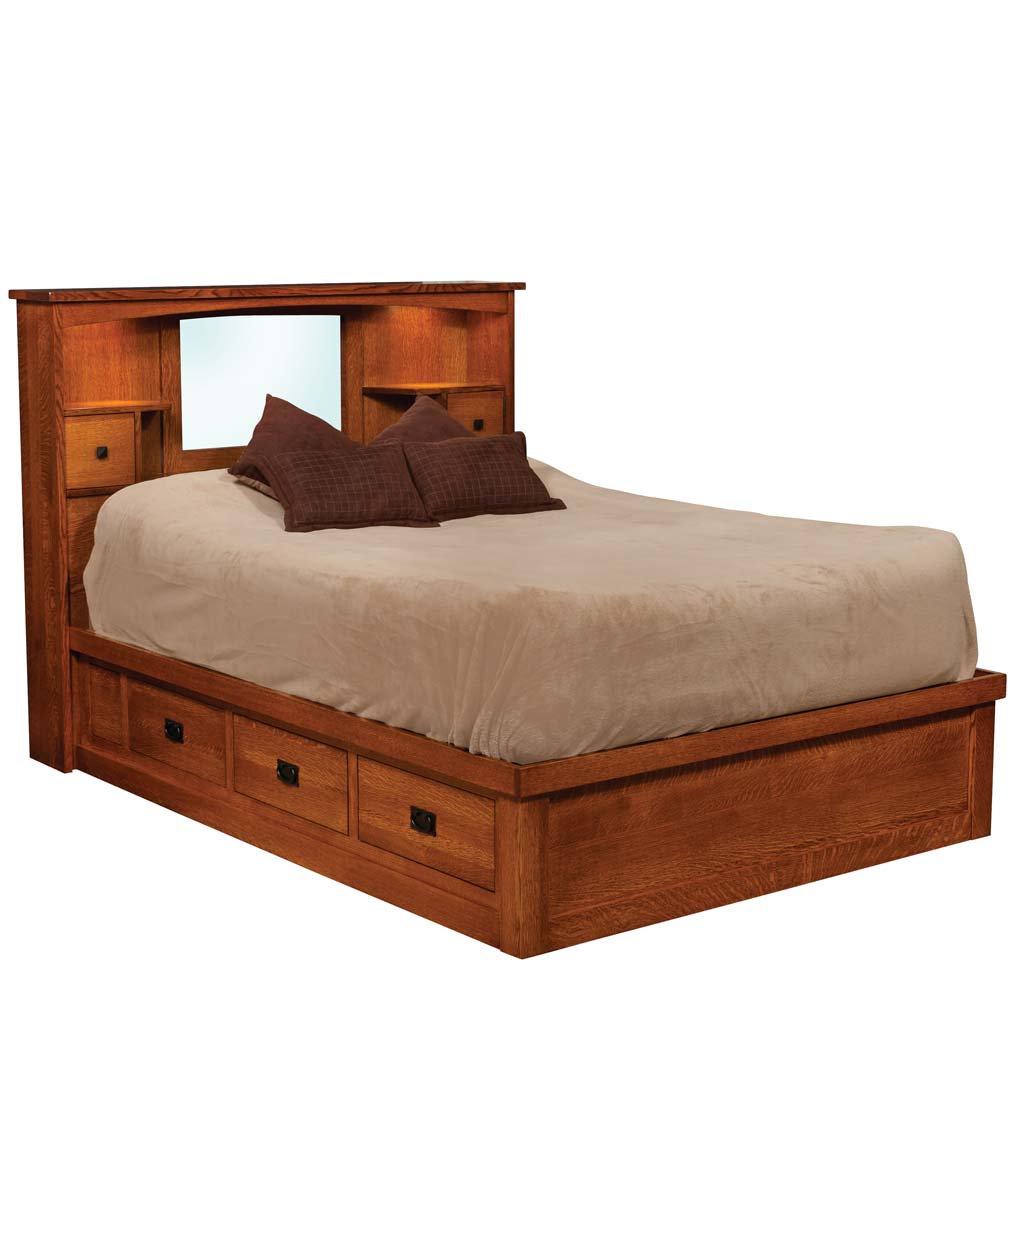 Captains Mission Bed Amish Direct, Mission Style California King Bed Frame